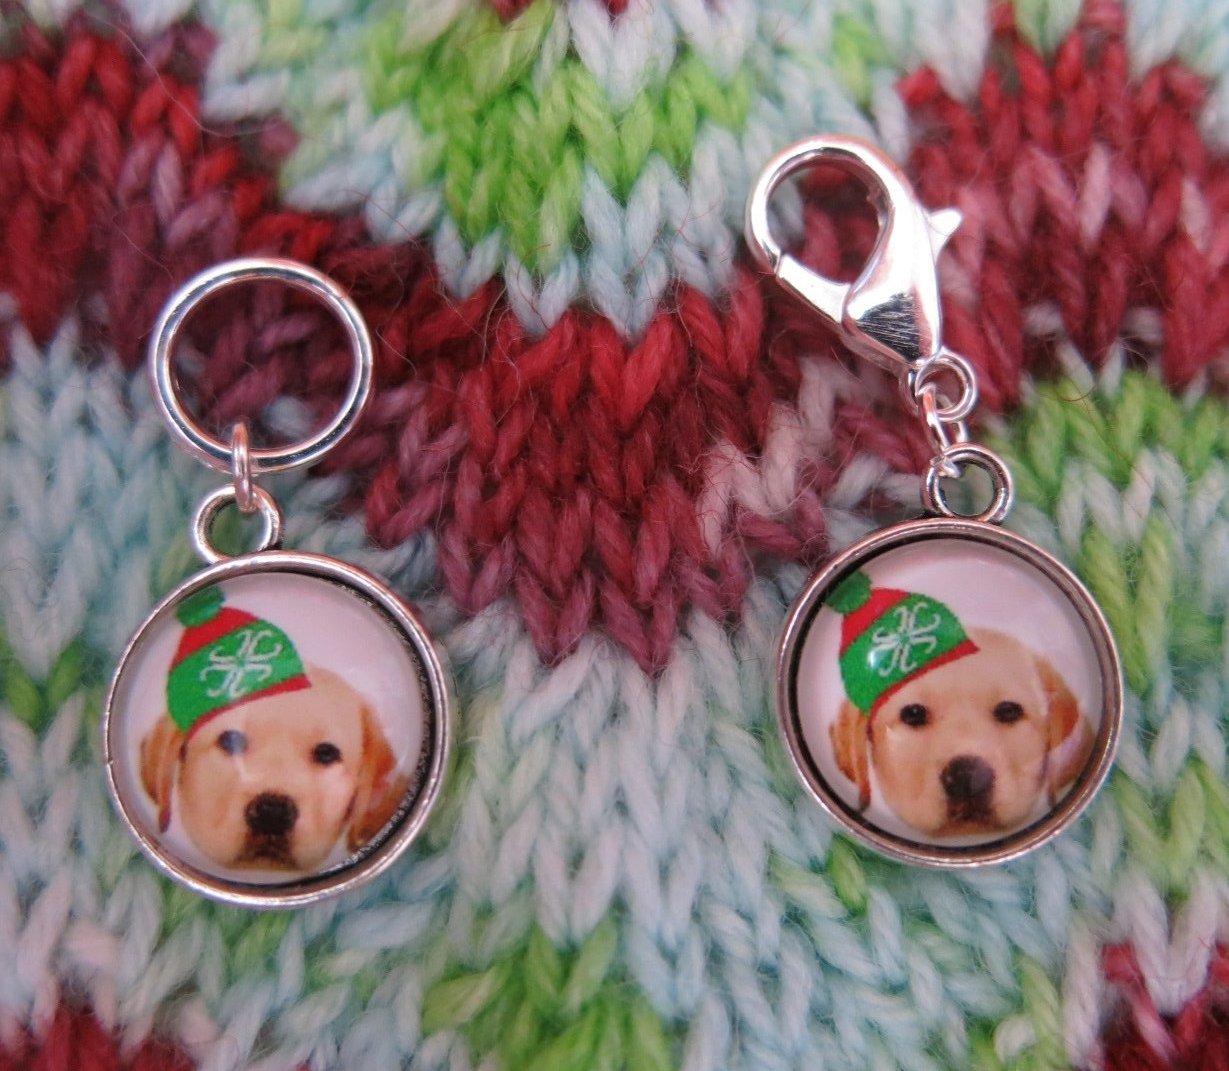 yellow labrador stitch marker charms for knitting and crochet